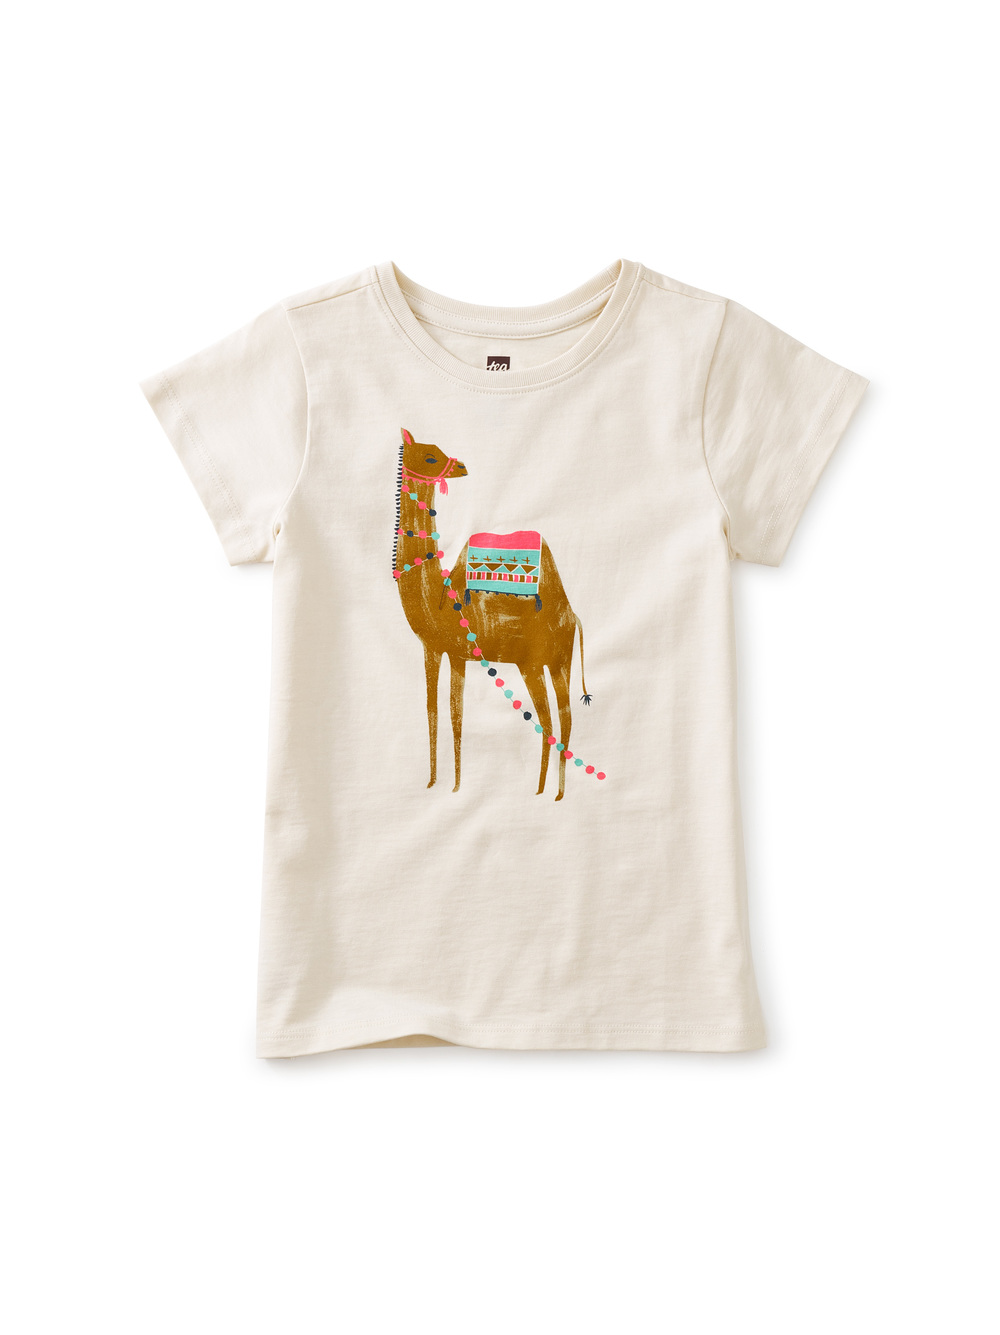 Hump Day Camel Graphic Tee